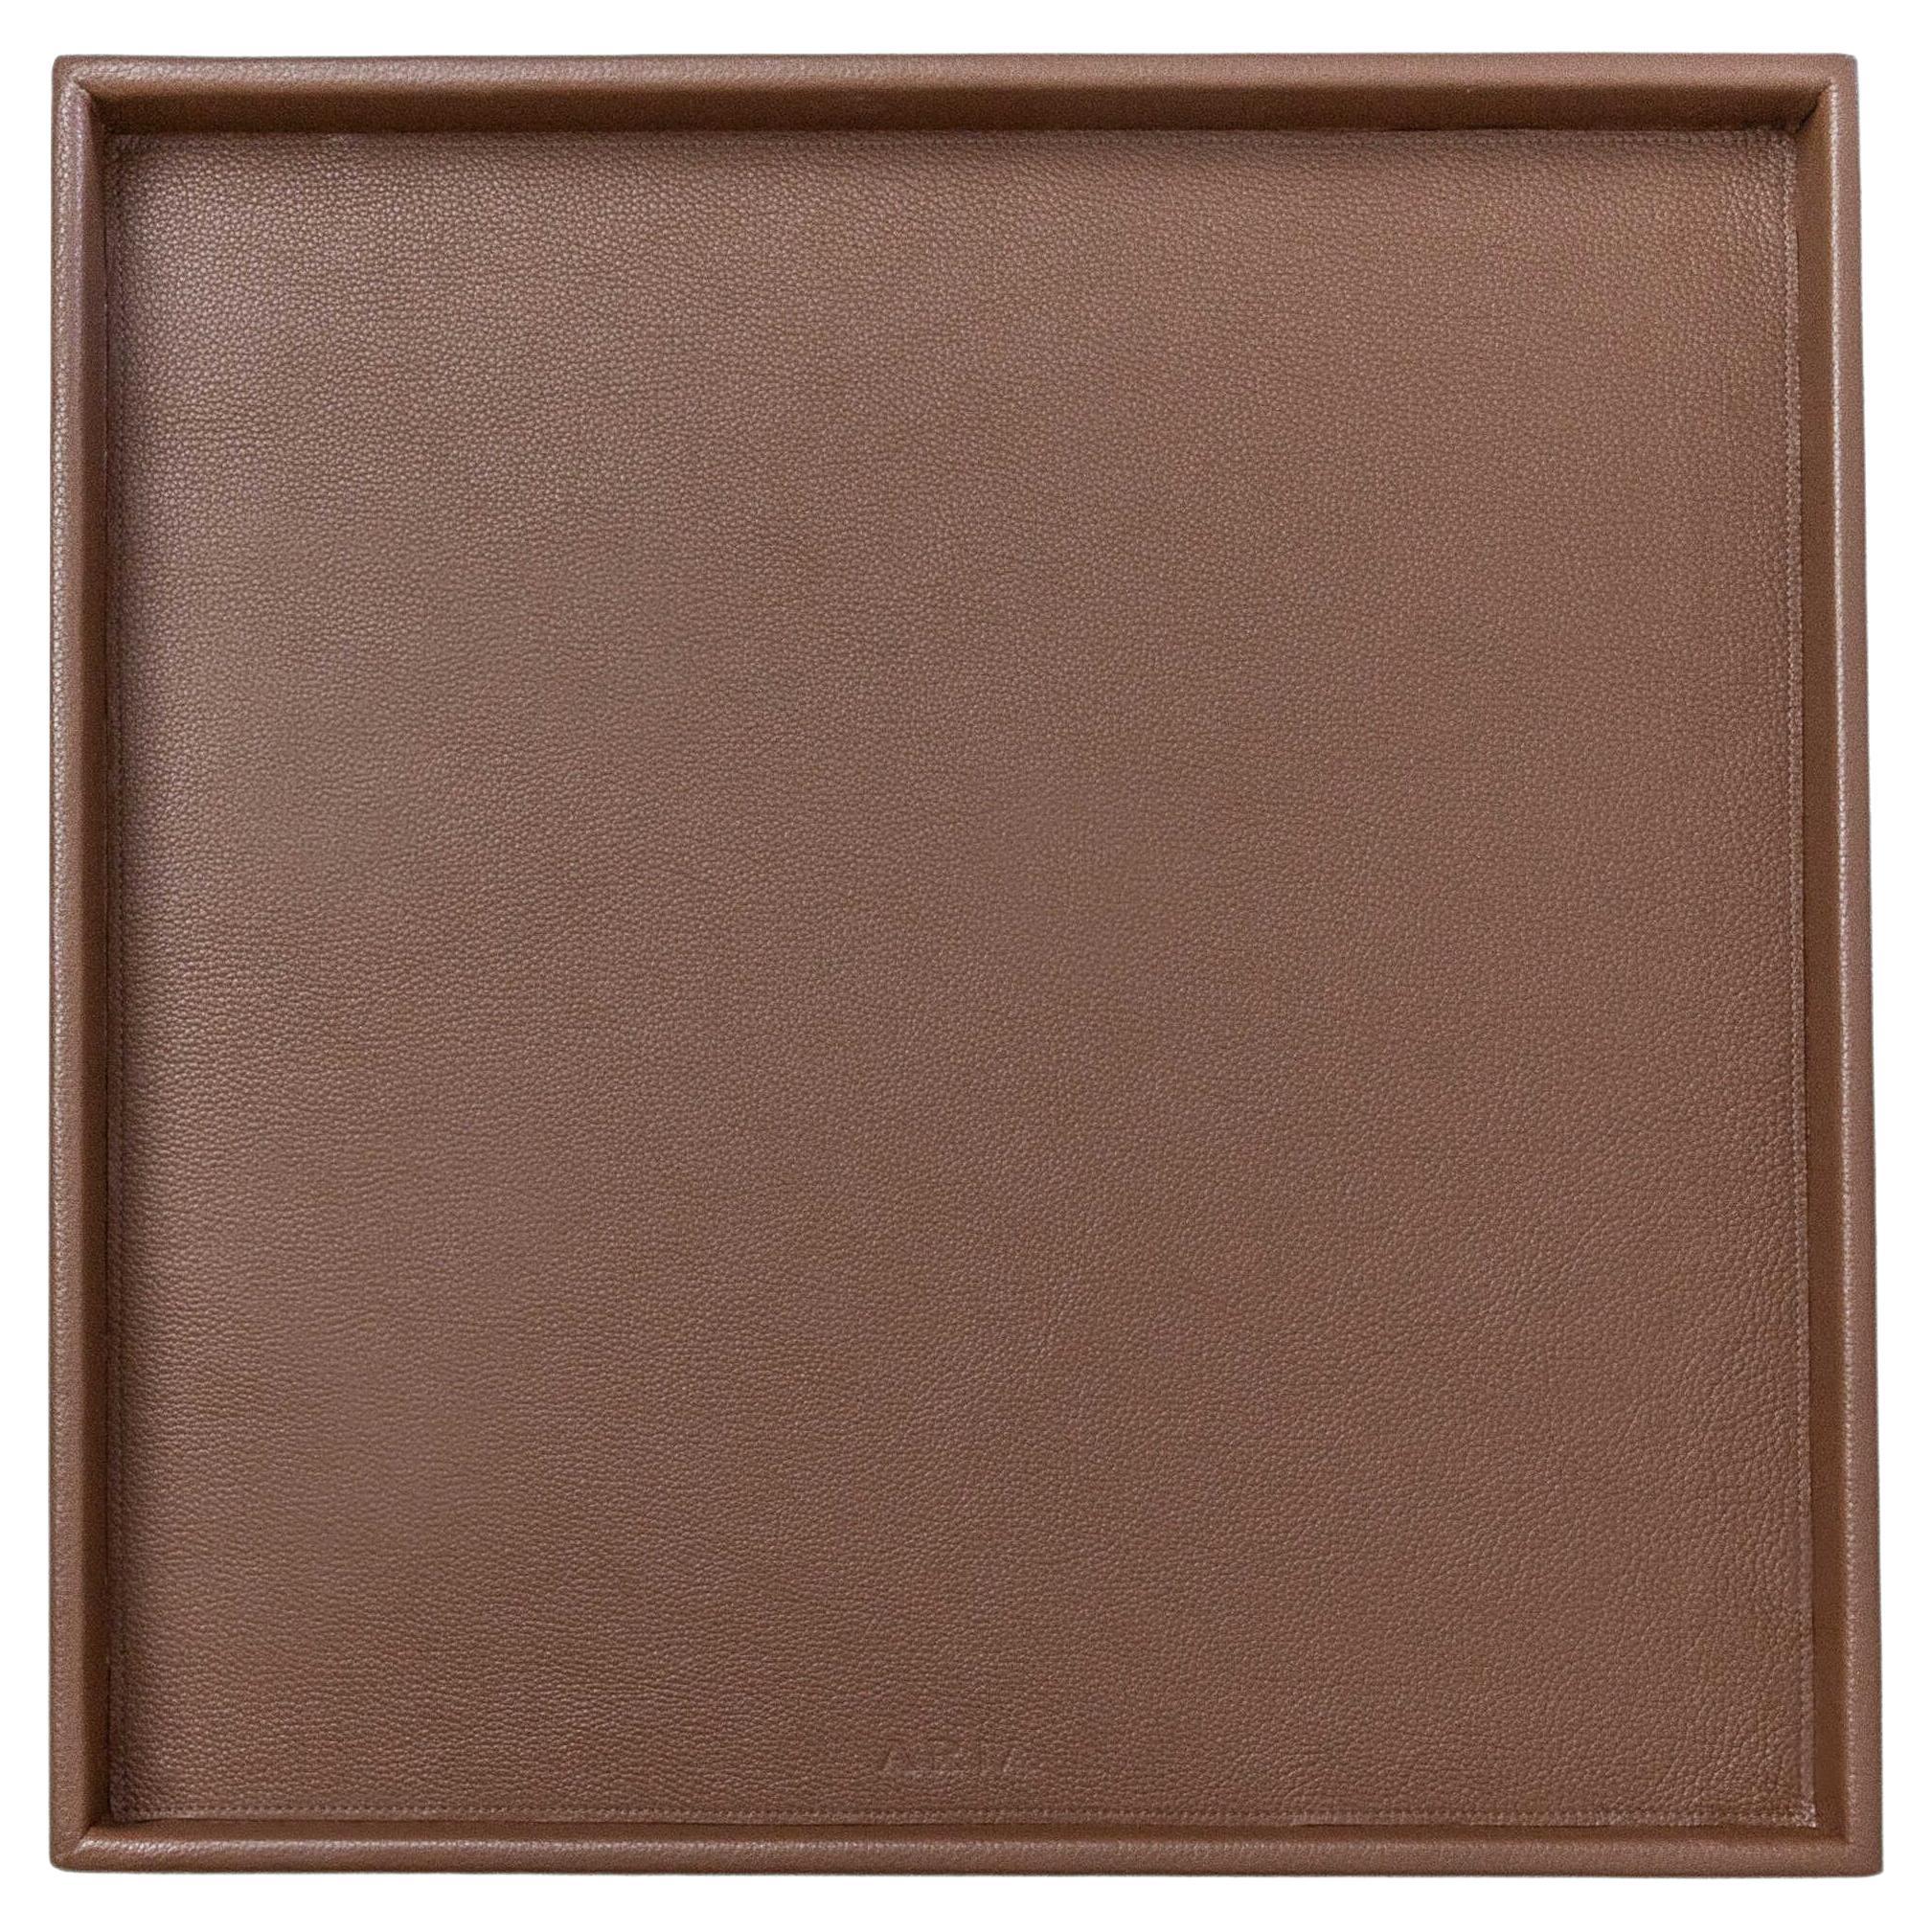 Modern Leather Tray, Large B Square Tray, Handmade - Color: Caramel For Sale